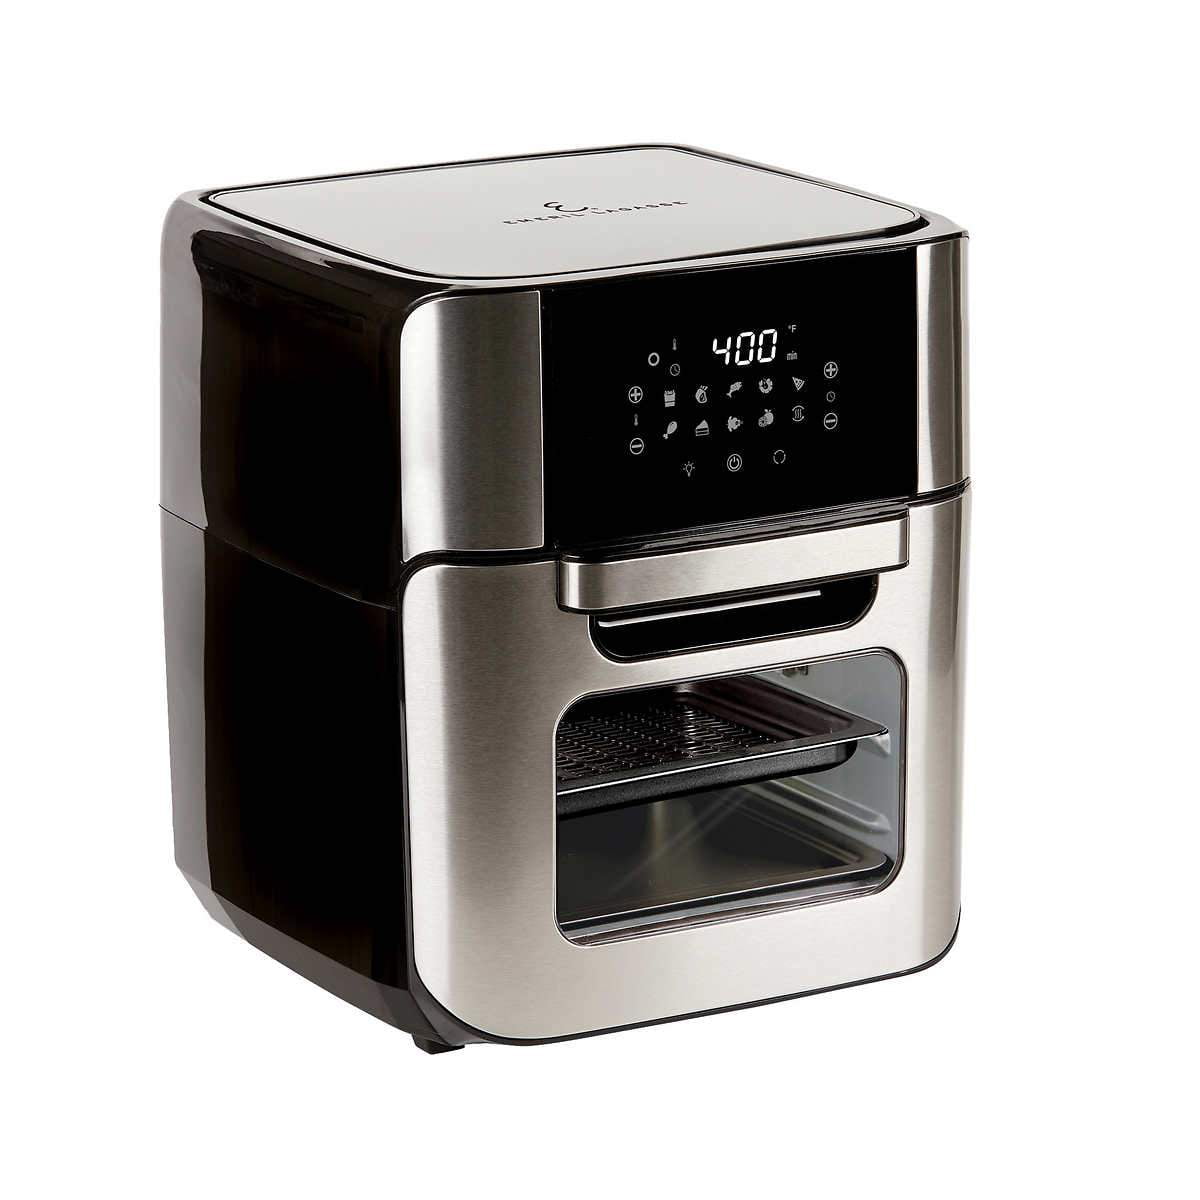 Emeril Lagasse's Extra Large Air Fryer